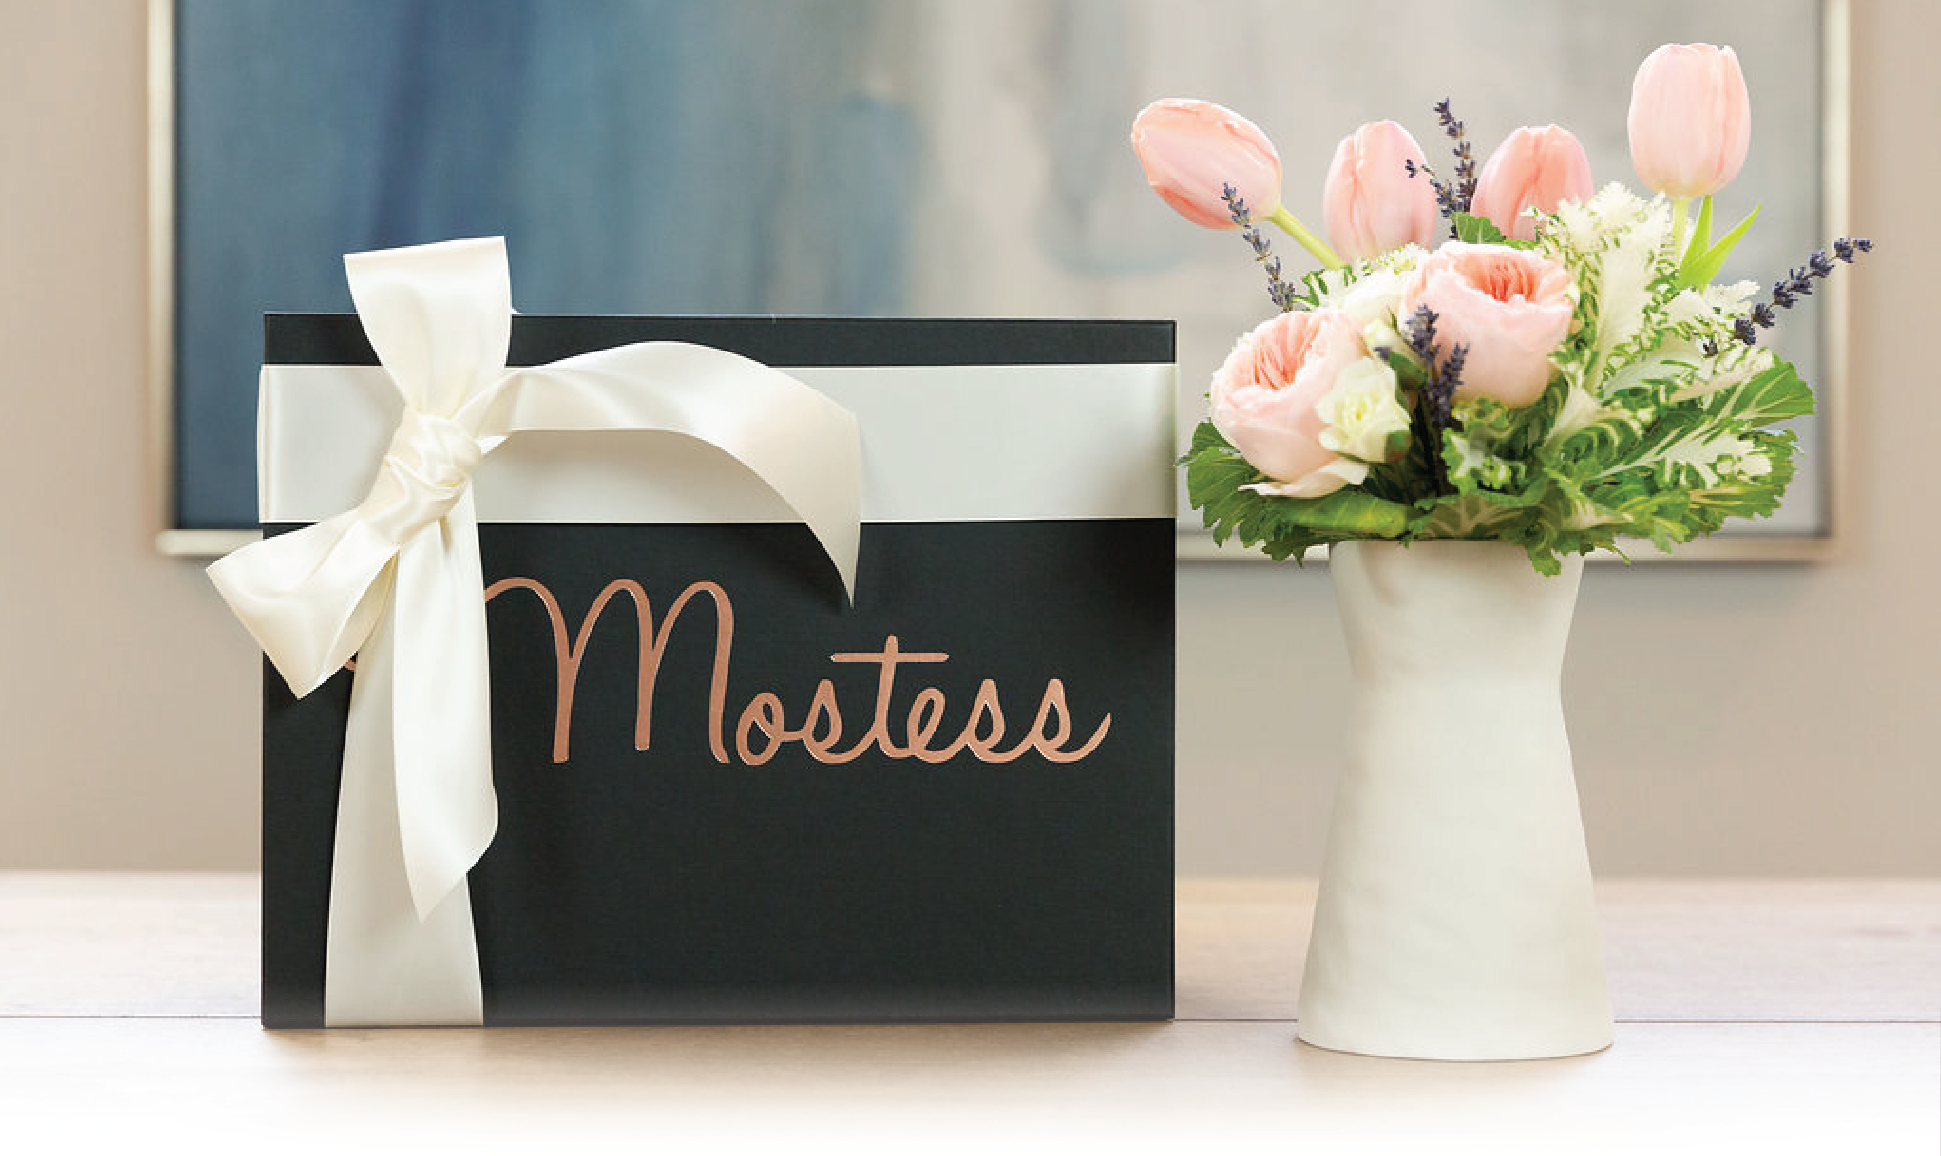 Mostess Spring 2019 Box Available Now!